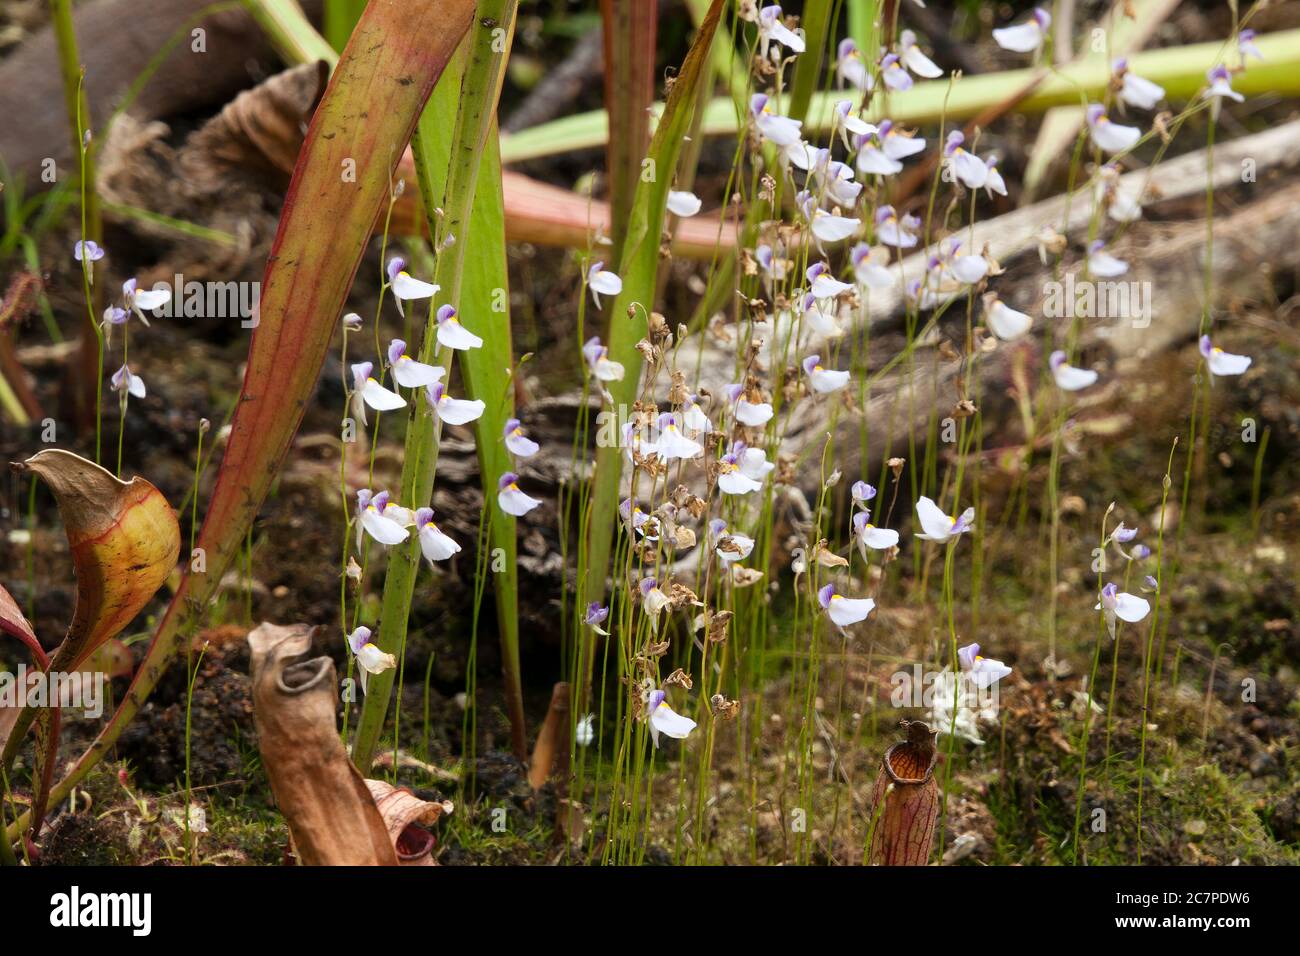 Sydney Australia, delicate purple flowers of utricularia bisquamata native to southern Africa Stock Photo